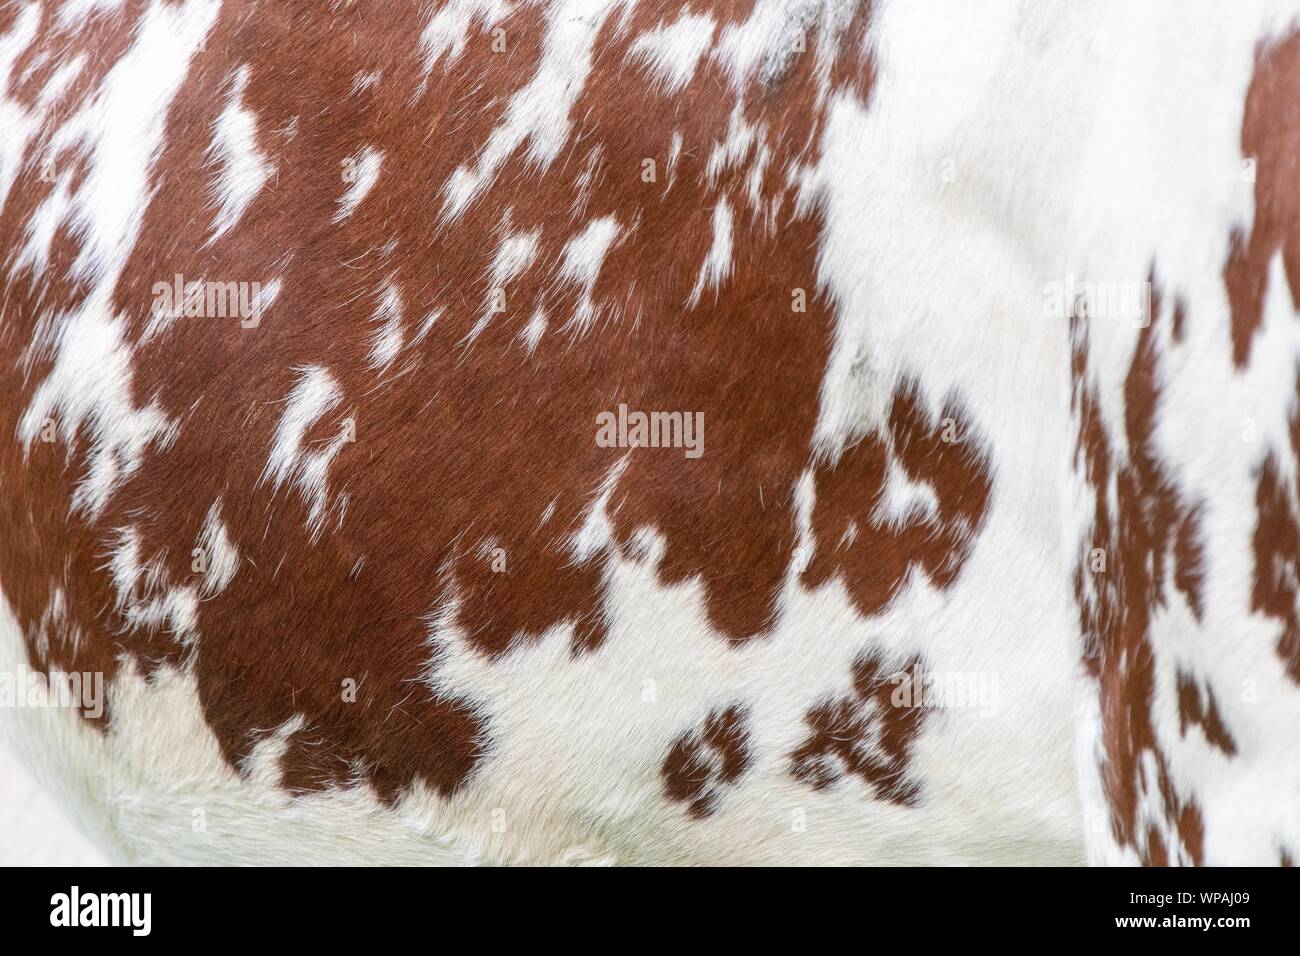 A close up photo of a brown and white cow hide Stock Photo